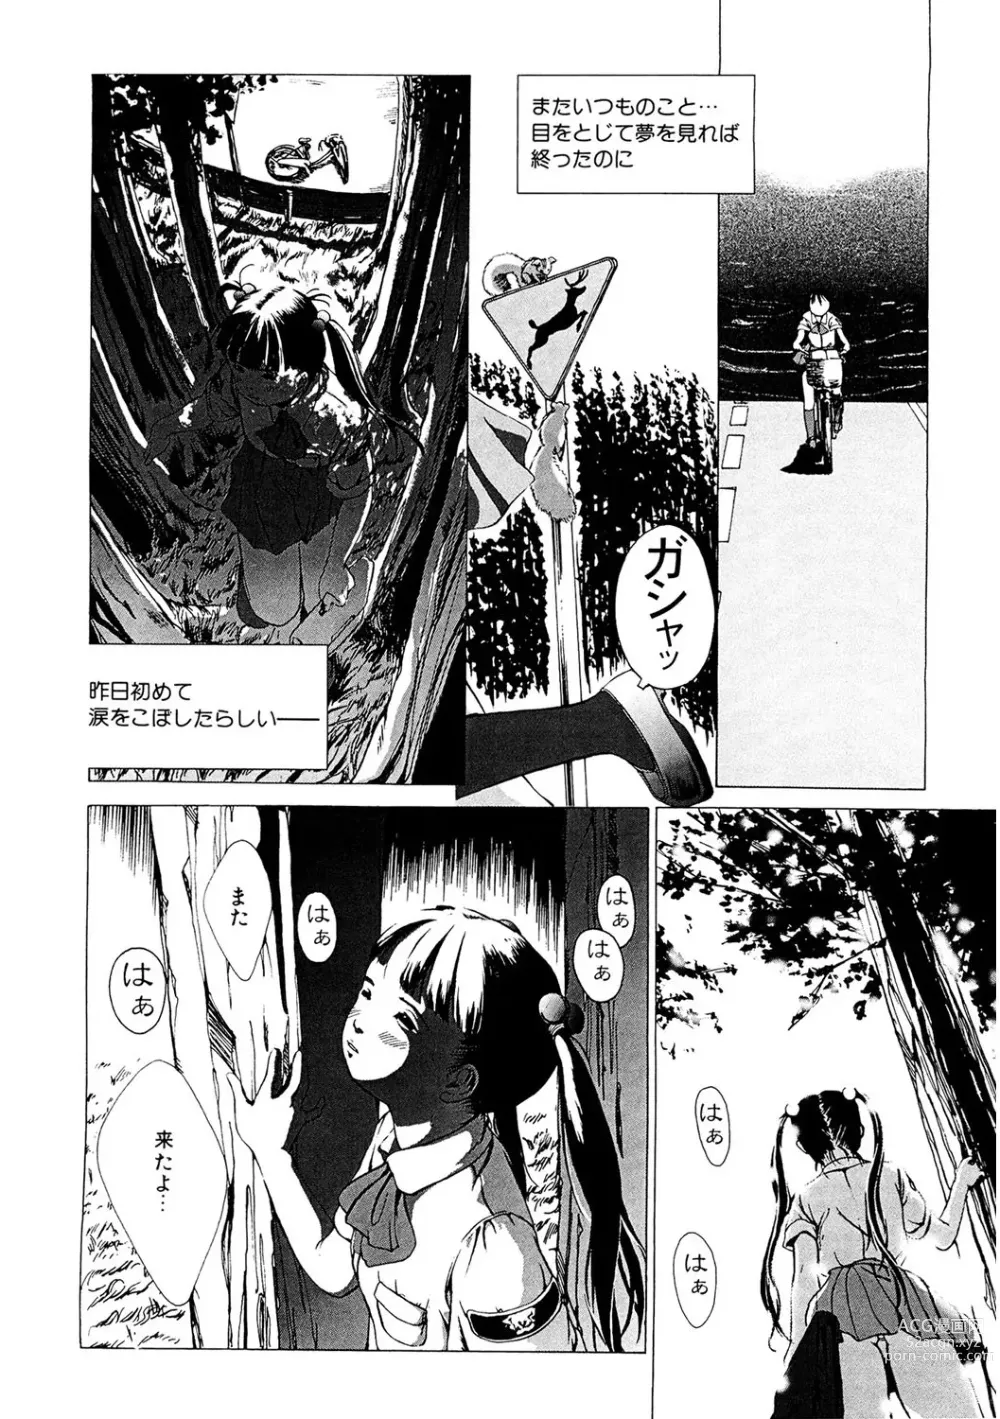 Page 159 of manga LQ -Little Queen- Vol. 53